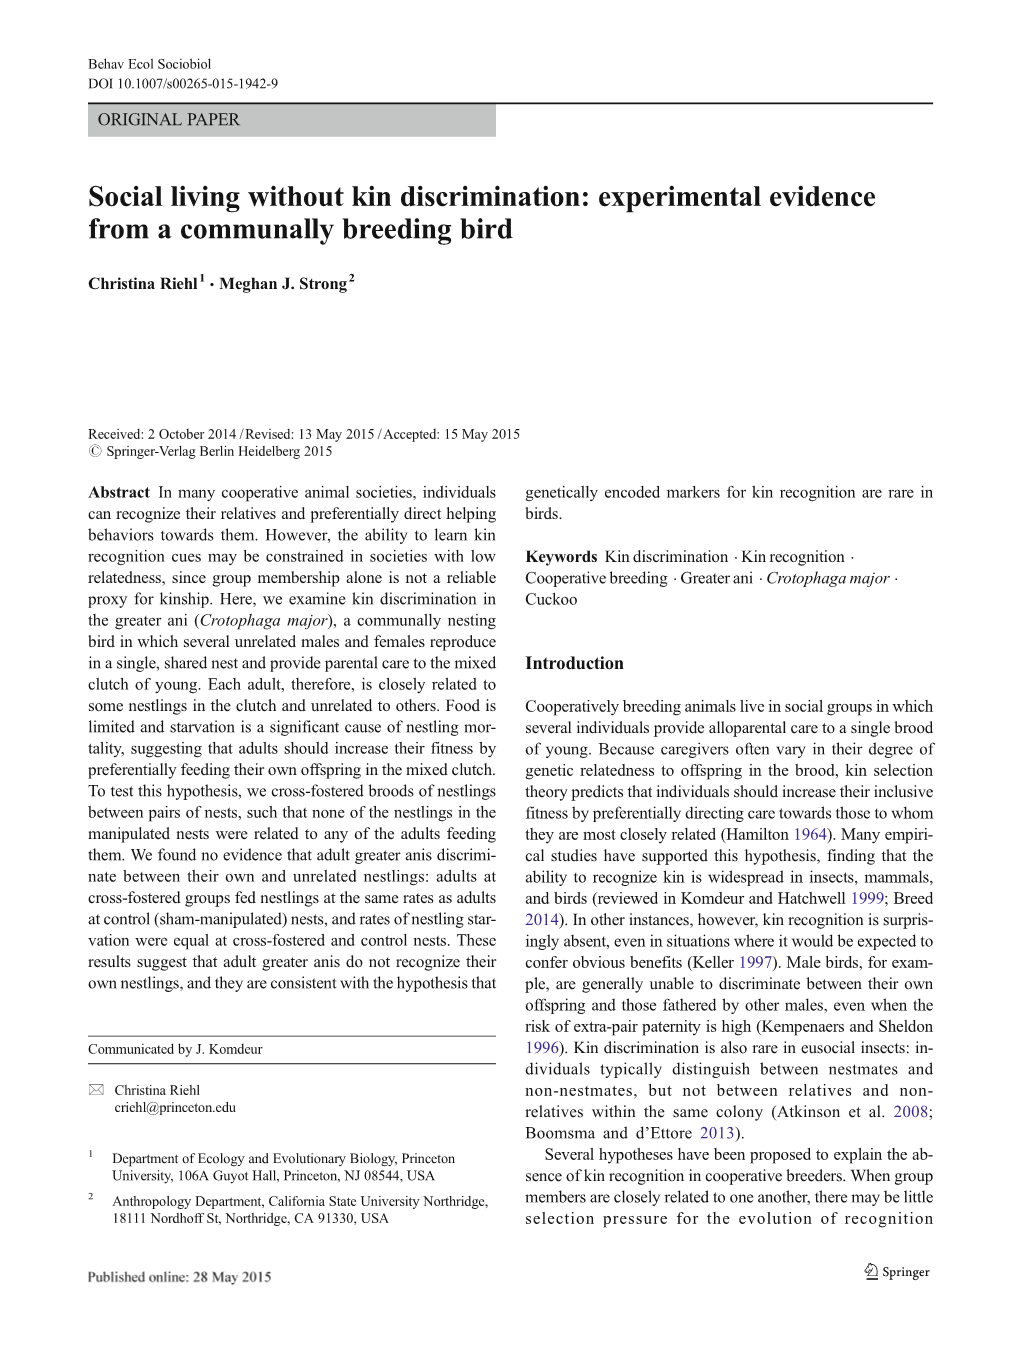 Social Living Without Kin Discrimination: Experimental Evidence from a Communally Breeding Bird